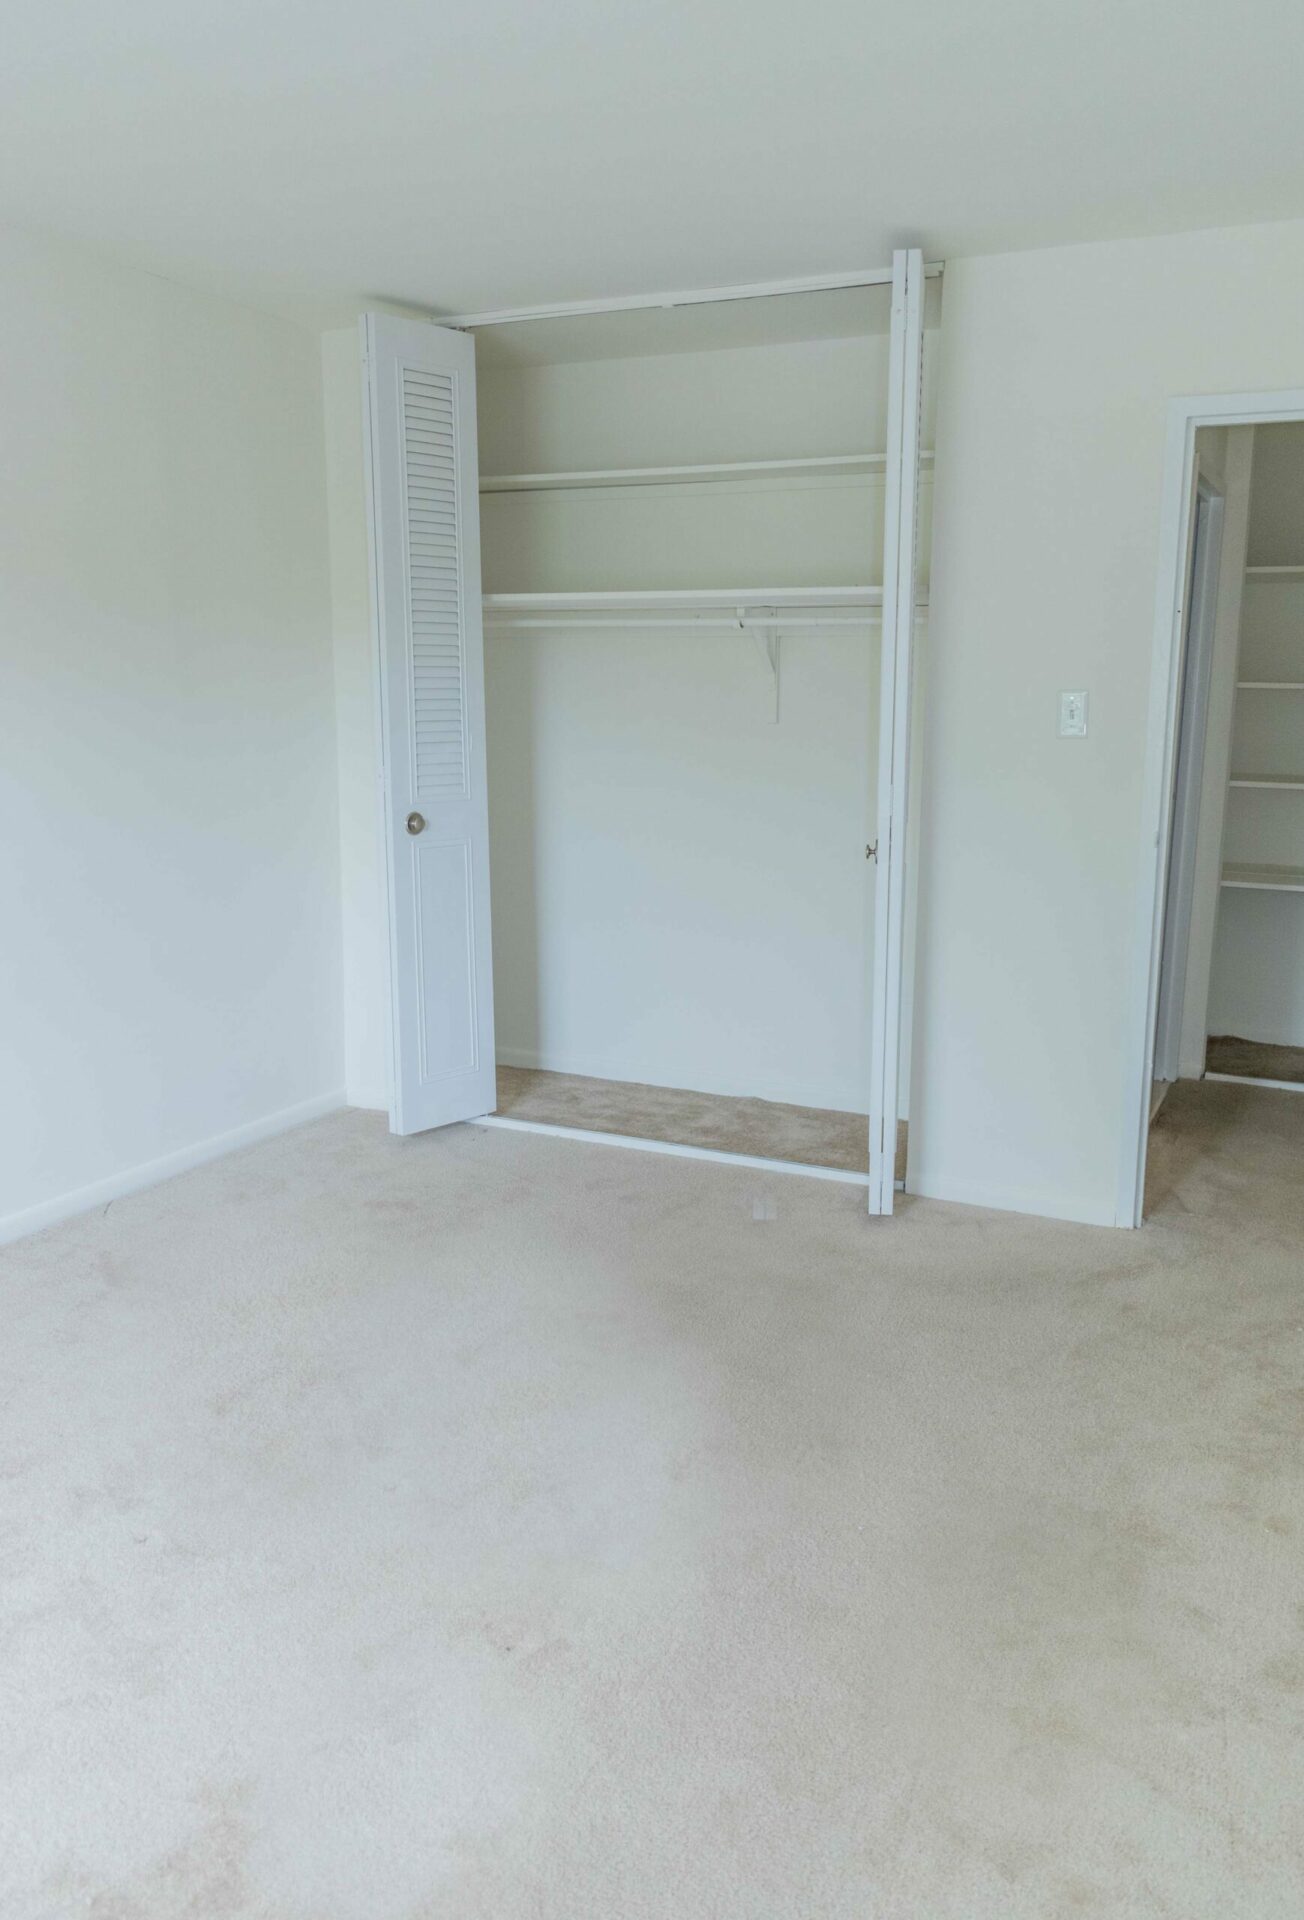 Westover Village carpeted bedroom with closet